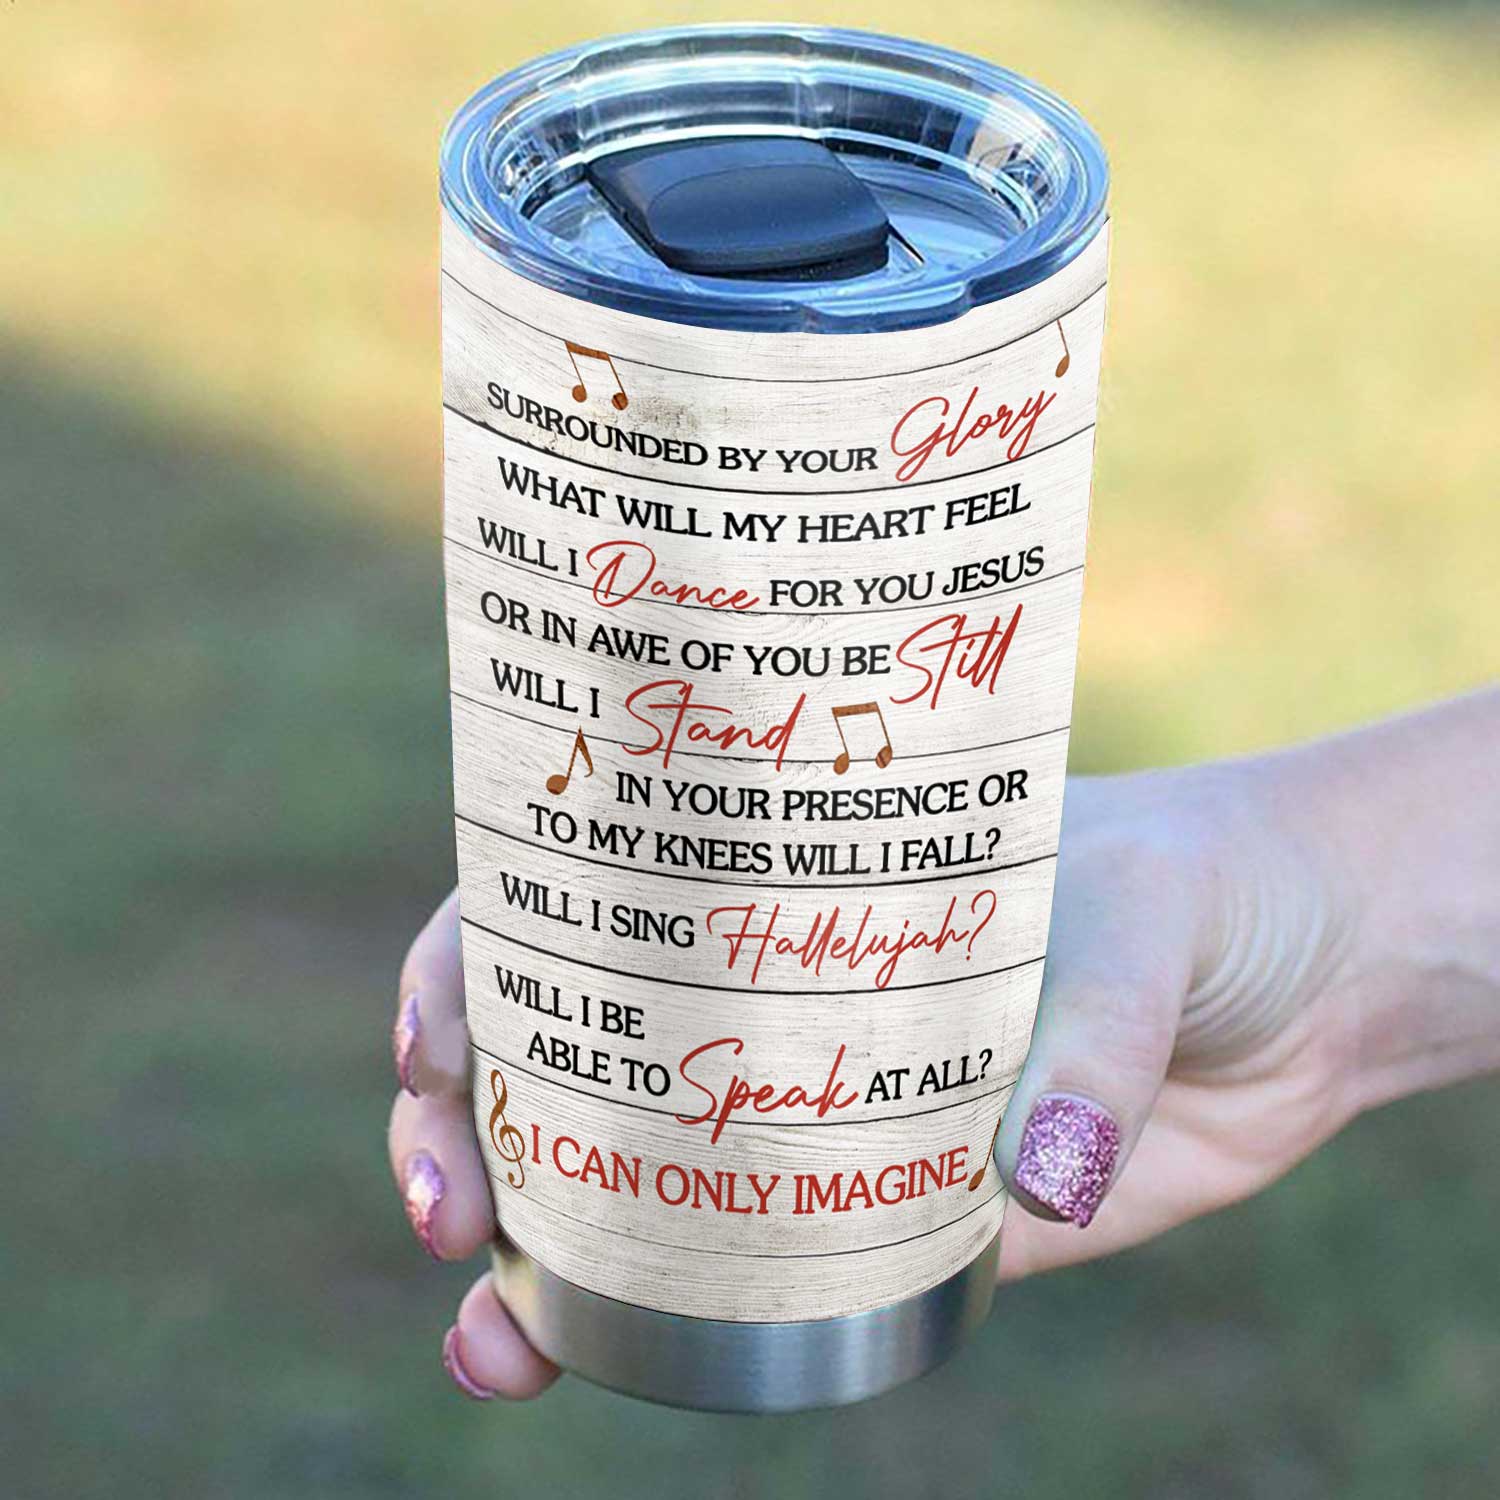 Cool Horse Tumbler, Surrounded By Your Glory What Will My Heart Feel Will I Sing Will I Be Able To Speak At All I Can Only Imagine Stainless Steel Tumbler, Horse Tumbler Lovers, Tumbler Gifts For Horse Lovers